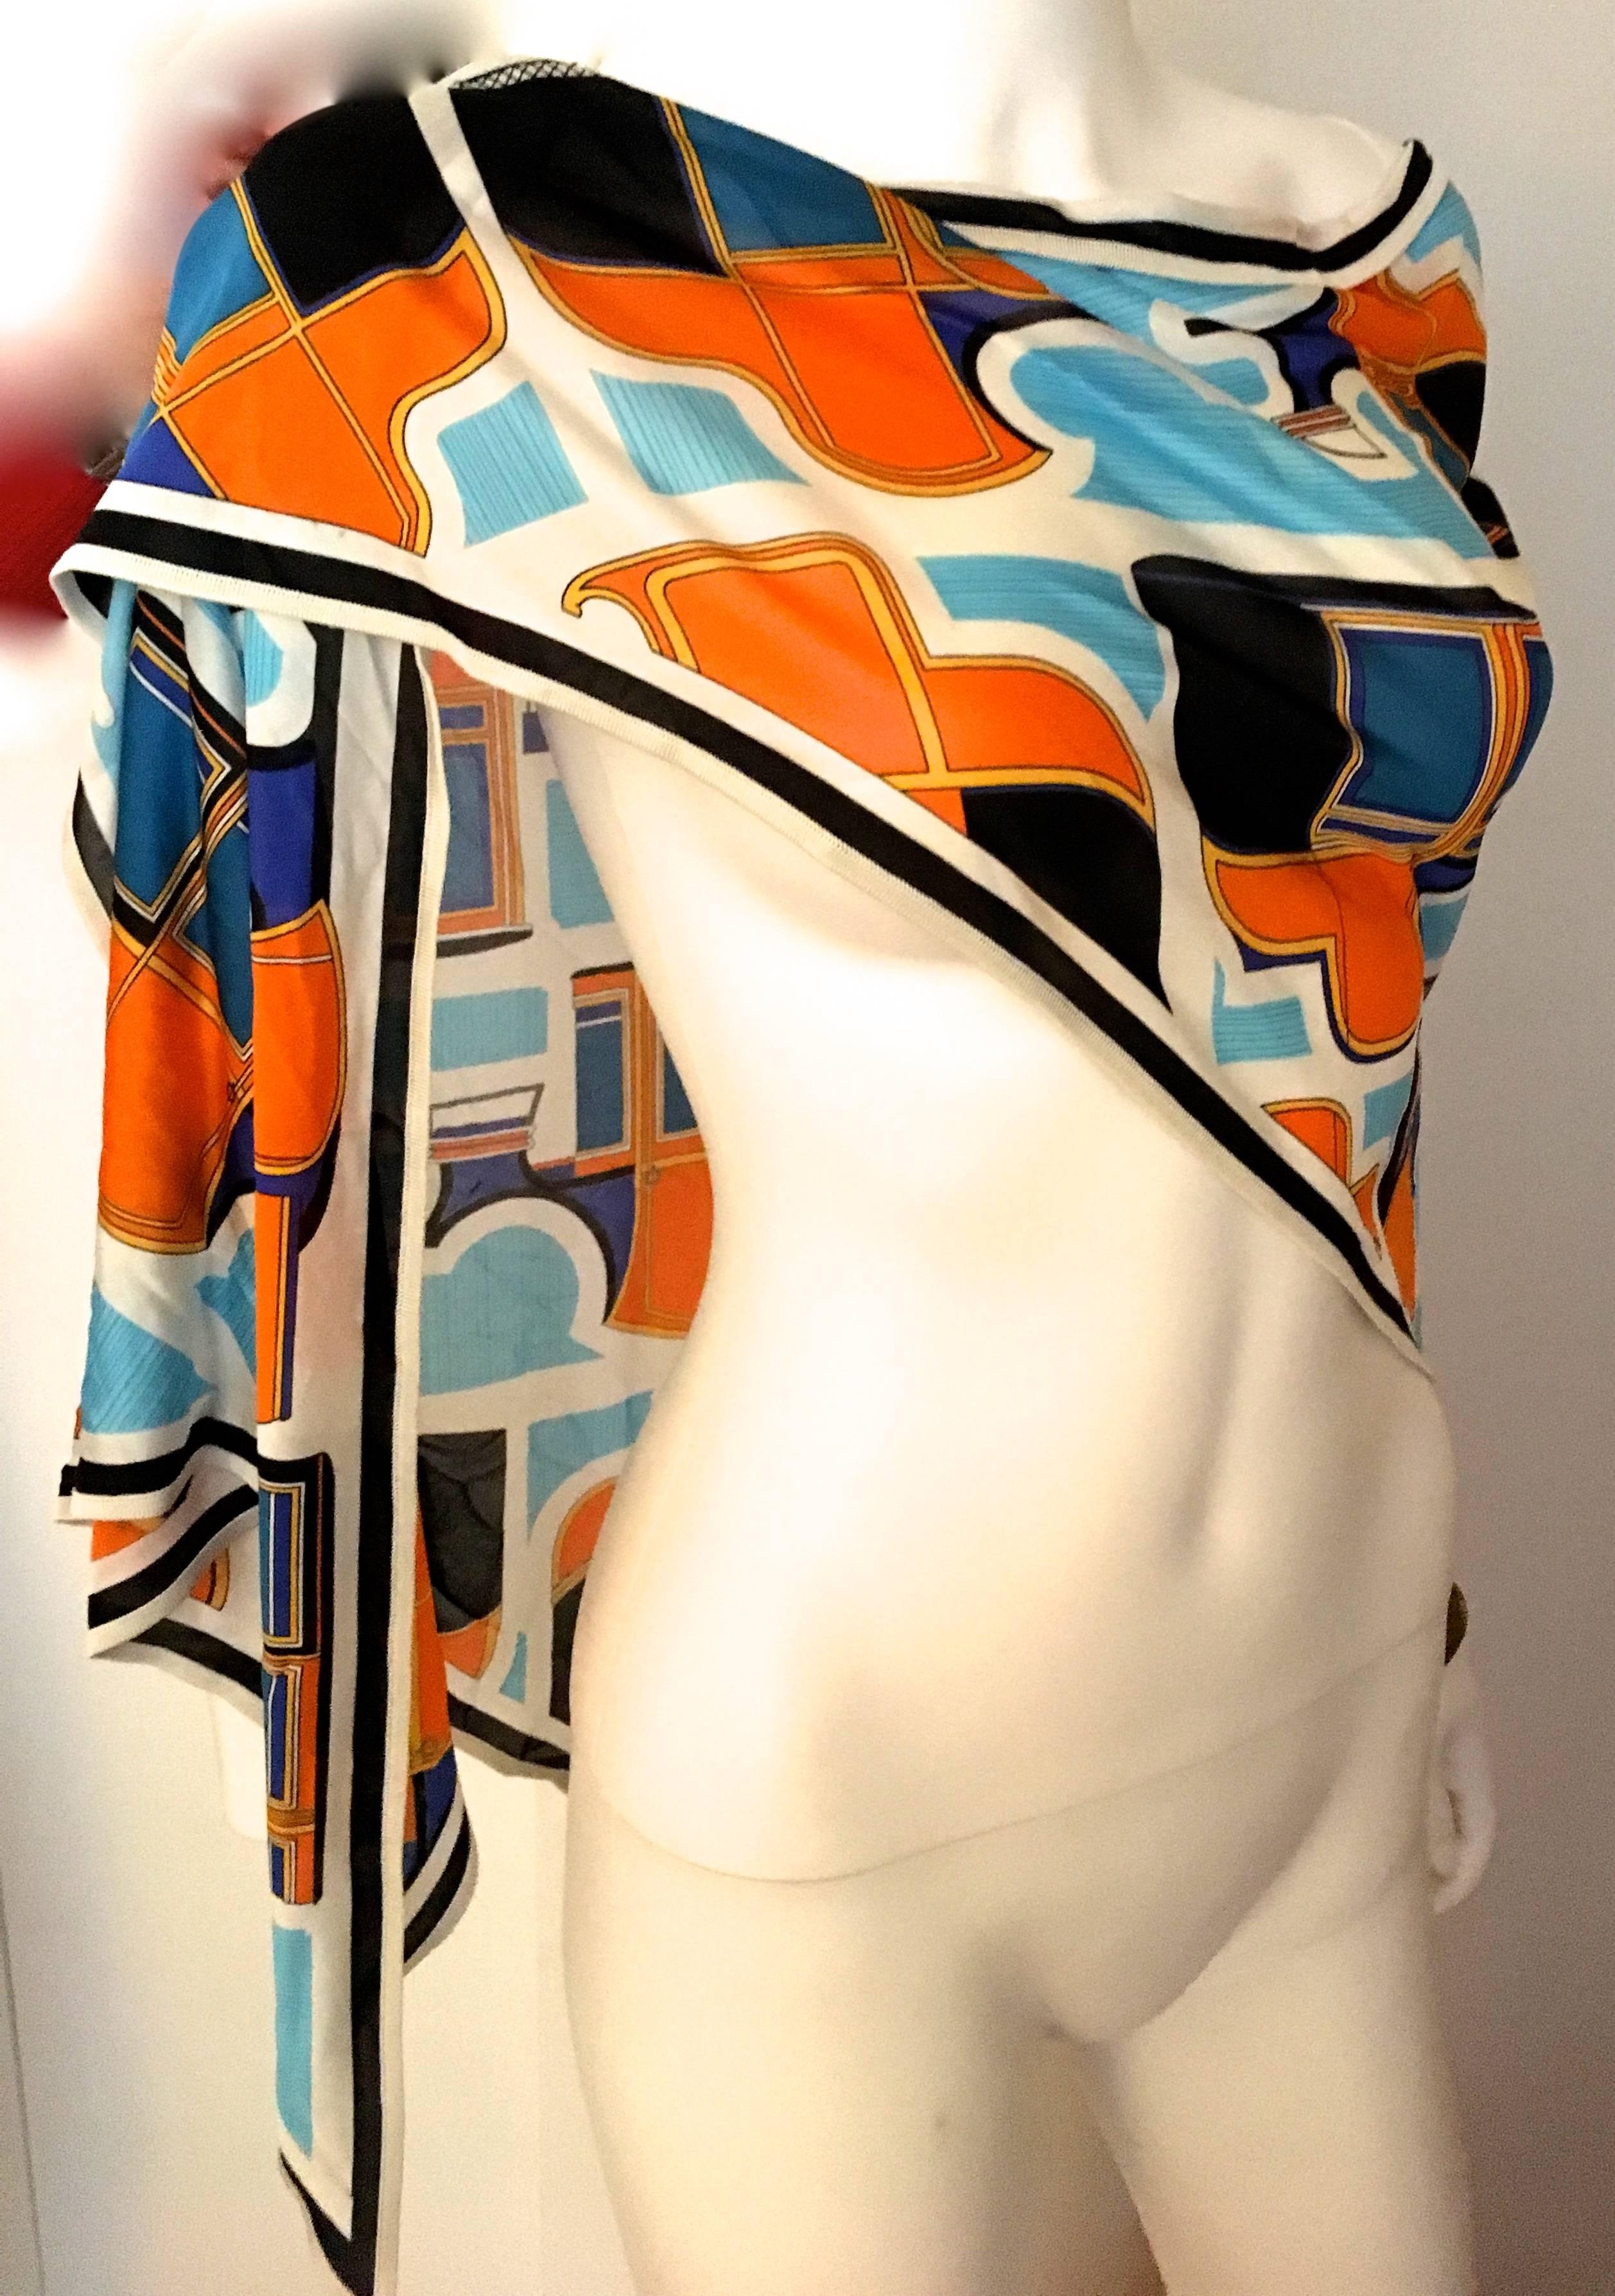 Presented here is a rare scarf from Hermes Paris. This beautiful scarf is significantly larger than the typical scarf from Hermes Paris and is more of a shawl size. The scarf is made from silk jersey and is a composition of abstract geometric horse